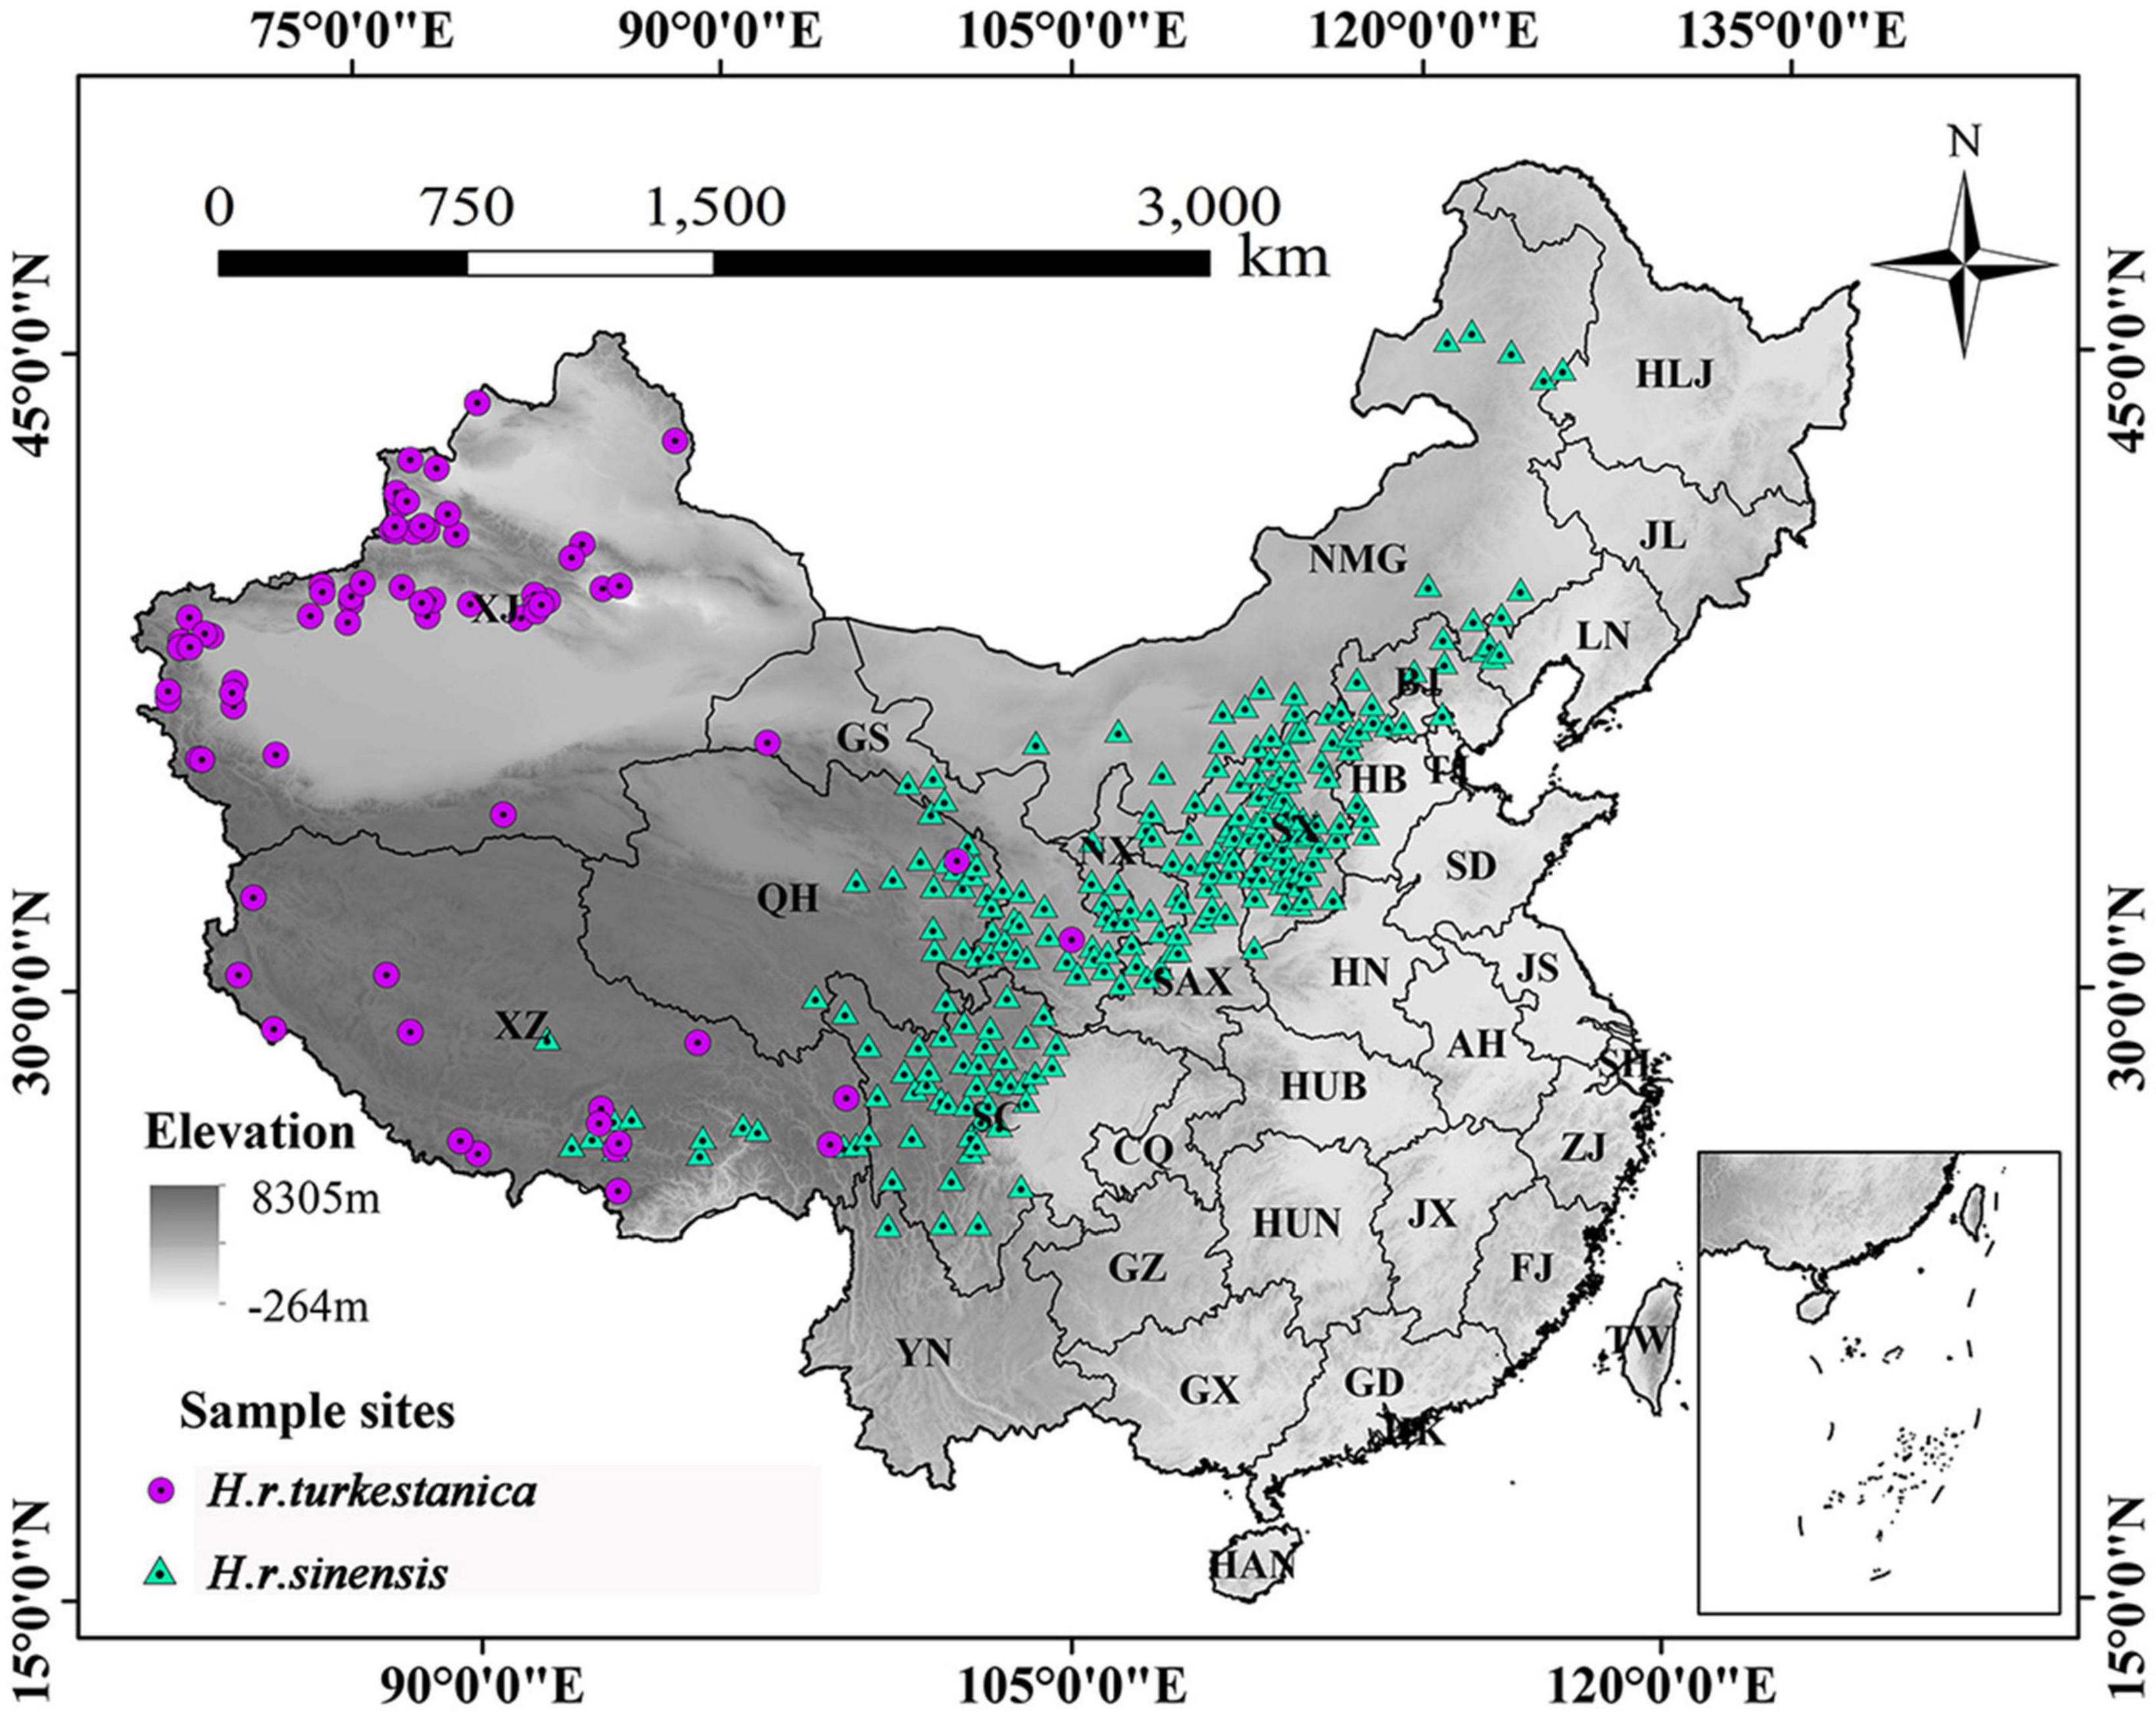 Modeling habitat suitability of Hippophae rhamnoides L. using MaxEnt under climate change in China: A case study of H. r. sinensis and H. r. turkestanica